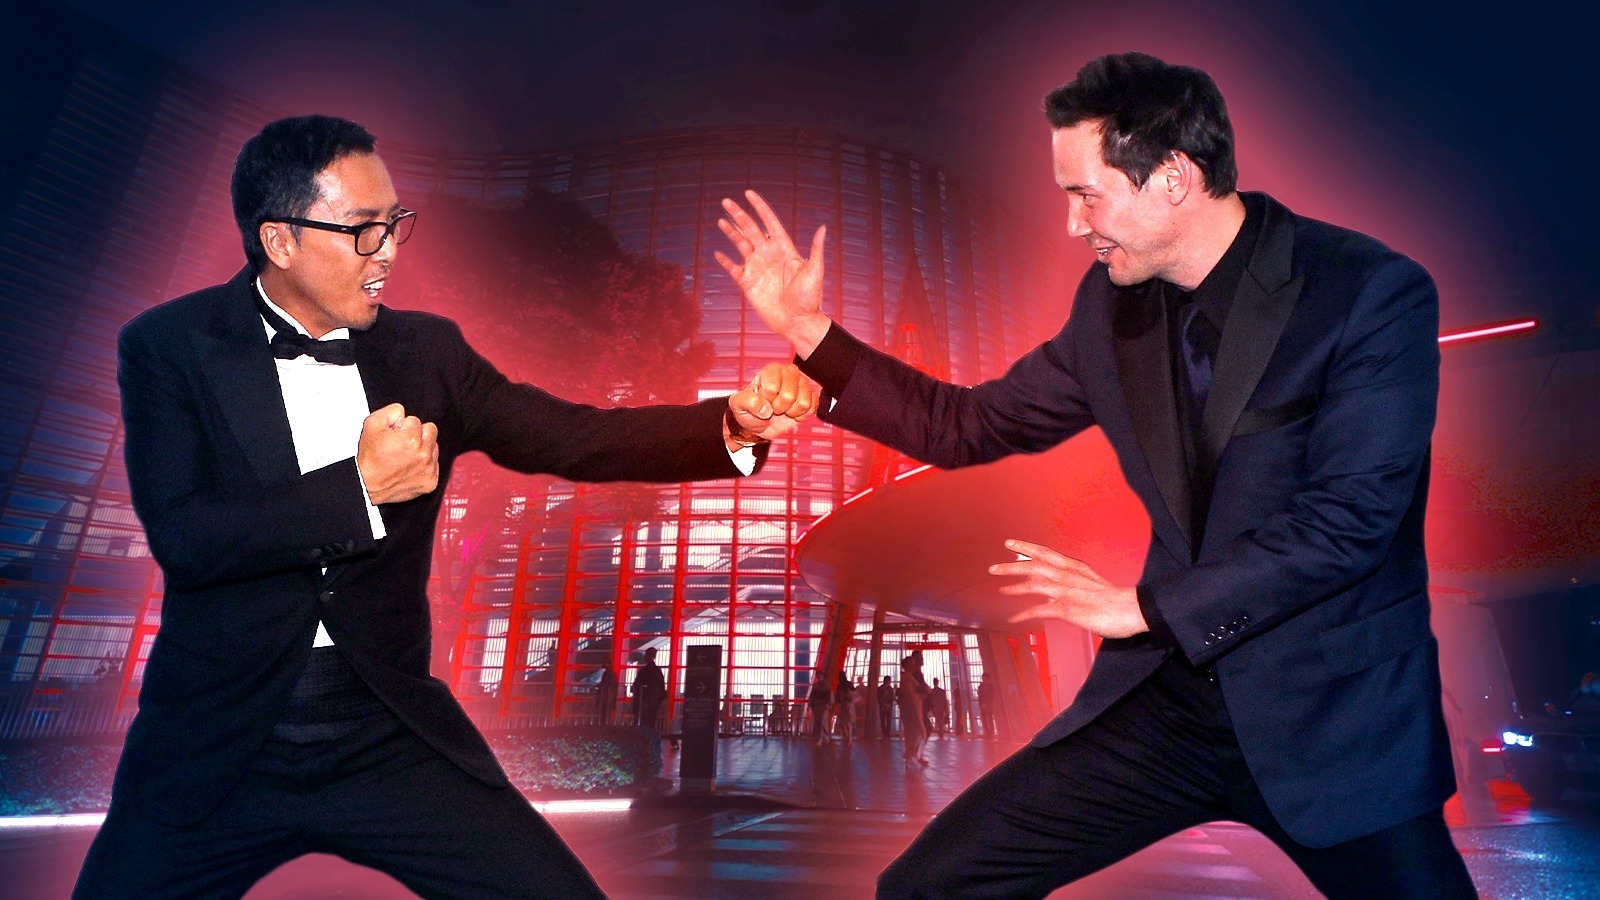 John Wick 4 Premiere: Keanu Reeves, Donnie Yen, and cast walk the red  carpet in Hollywood 